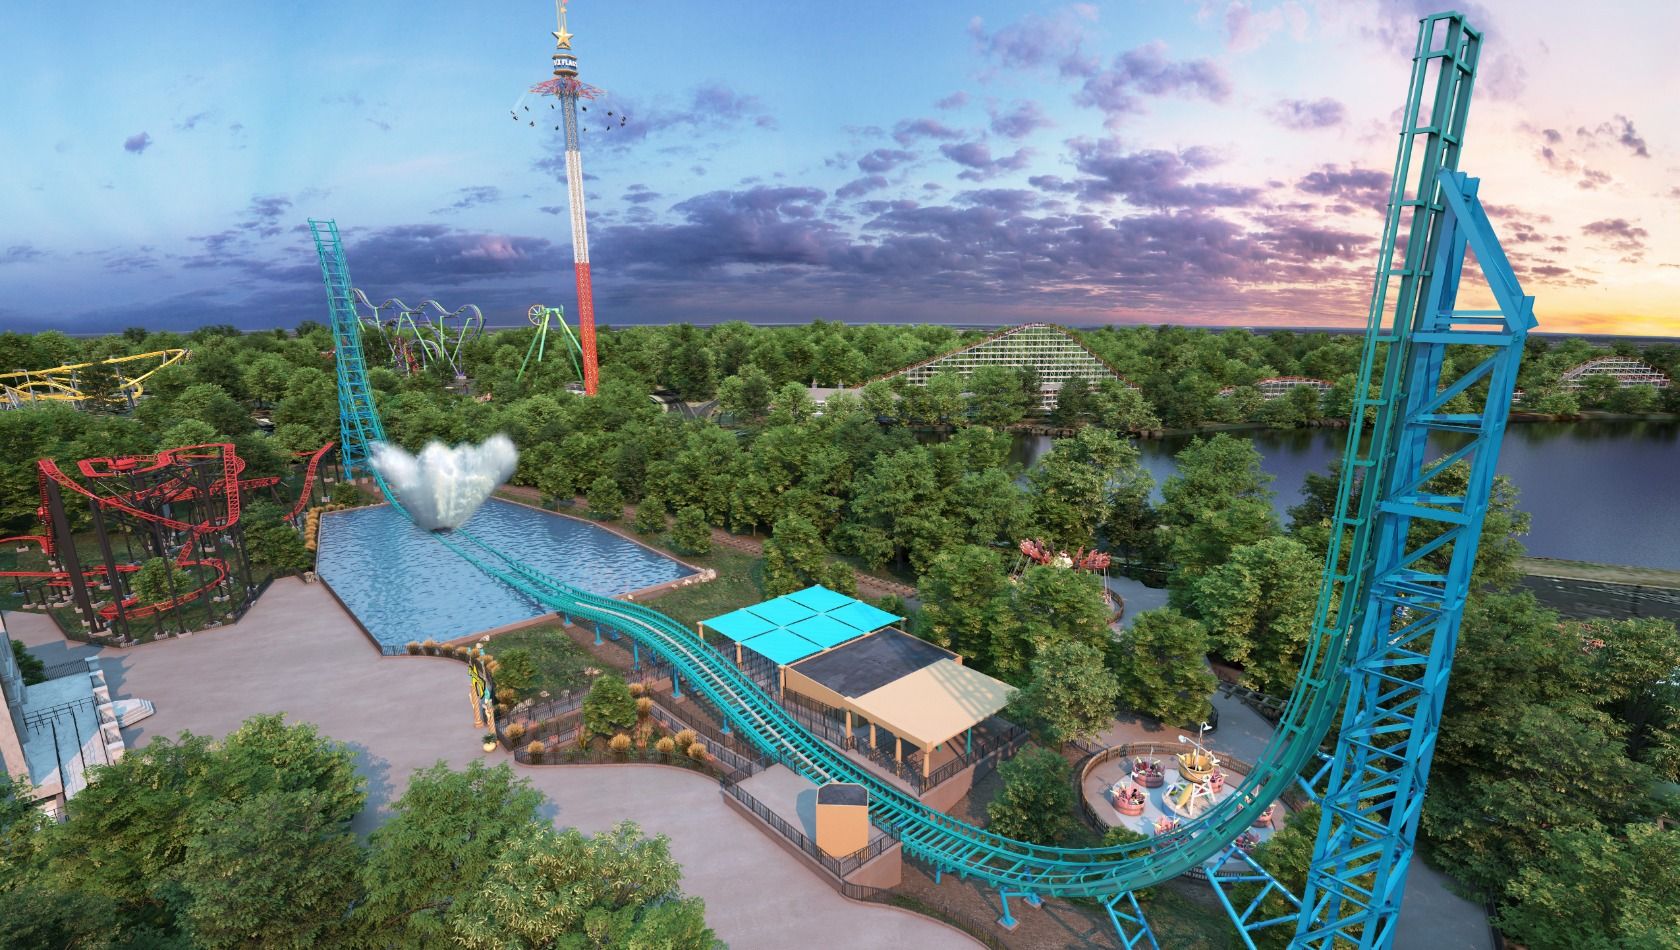 Aquaman: Power Wave in Six Flags Over Texas (NEW in 2022)